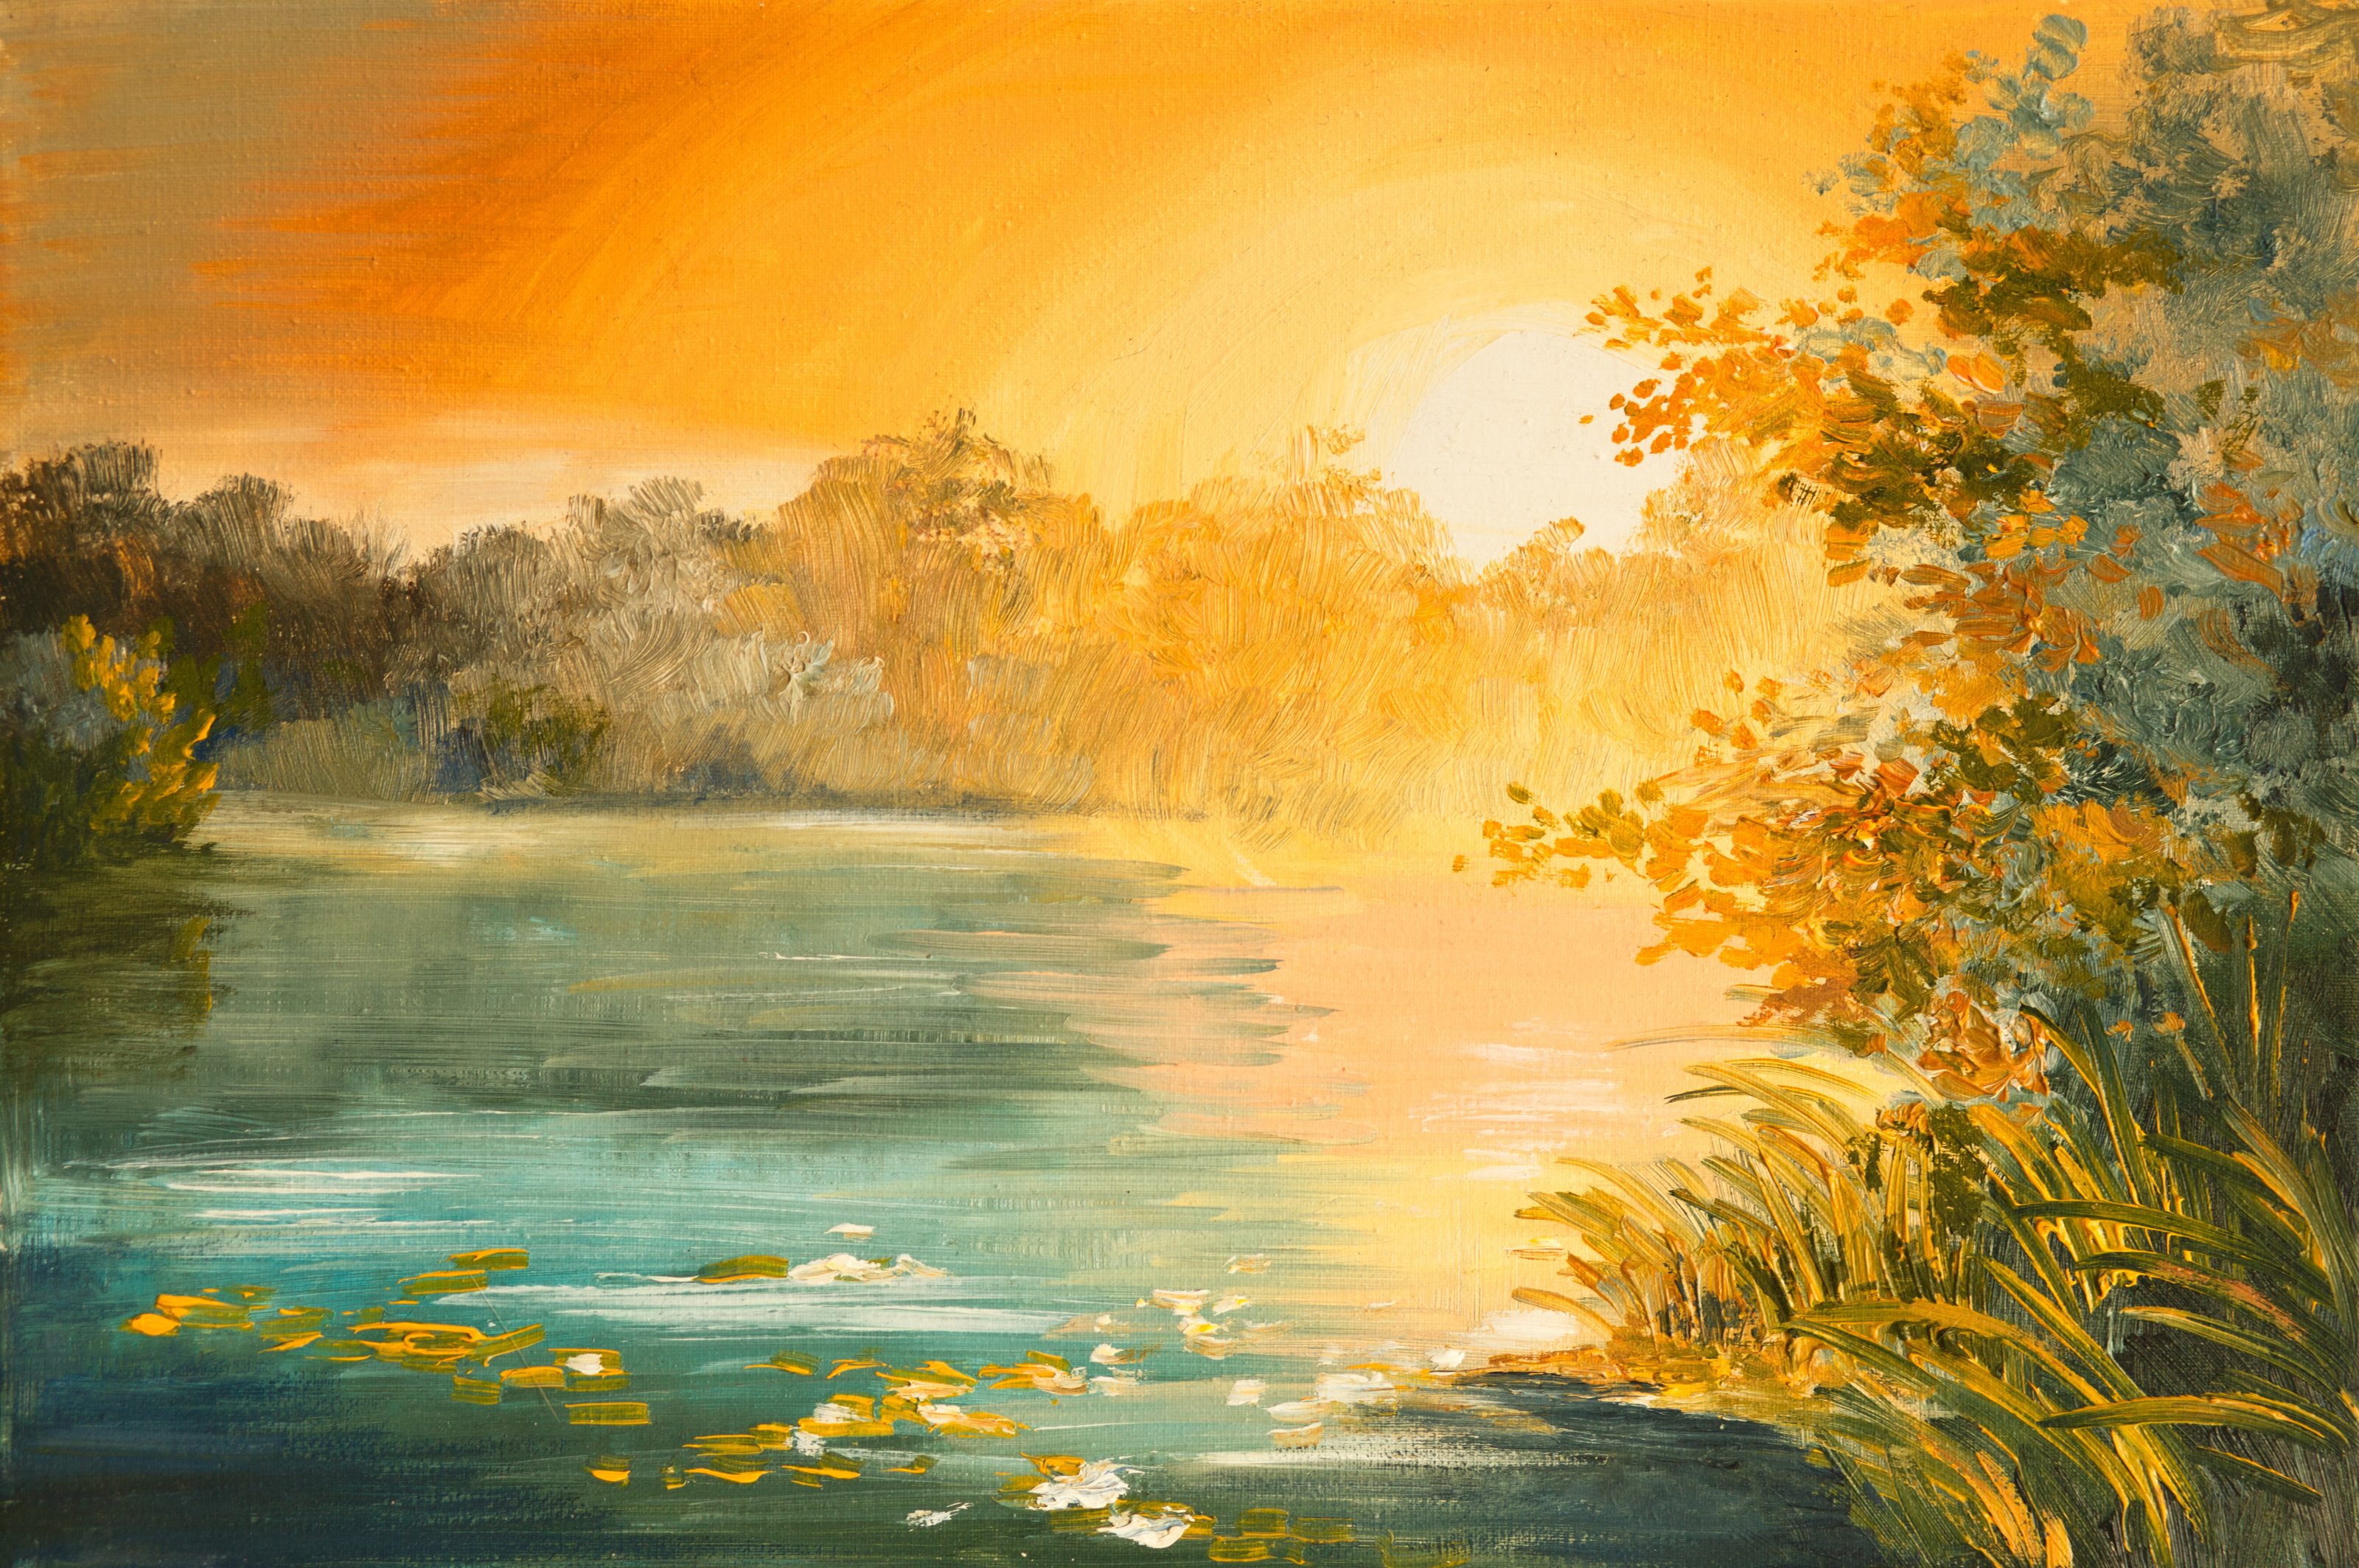 Your Oil Mural The Way - Murals Lake Sunset Painting On Wallpaper